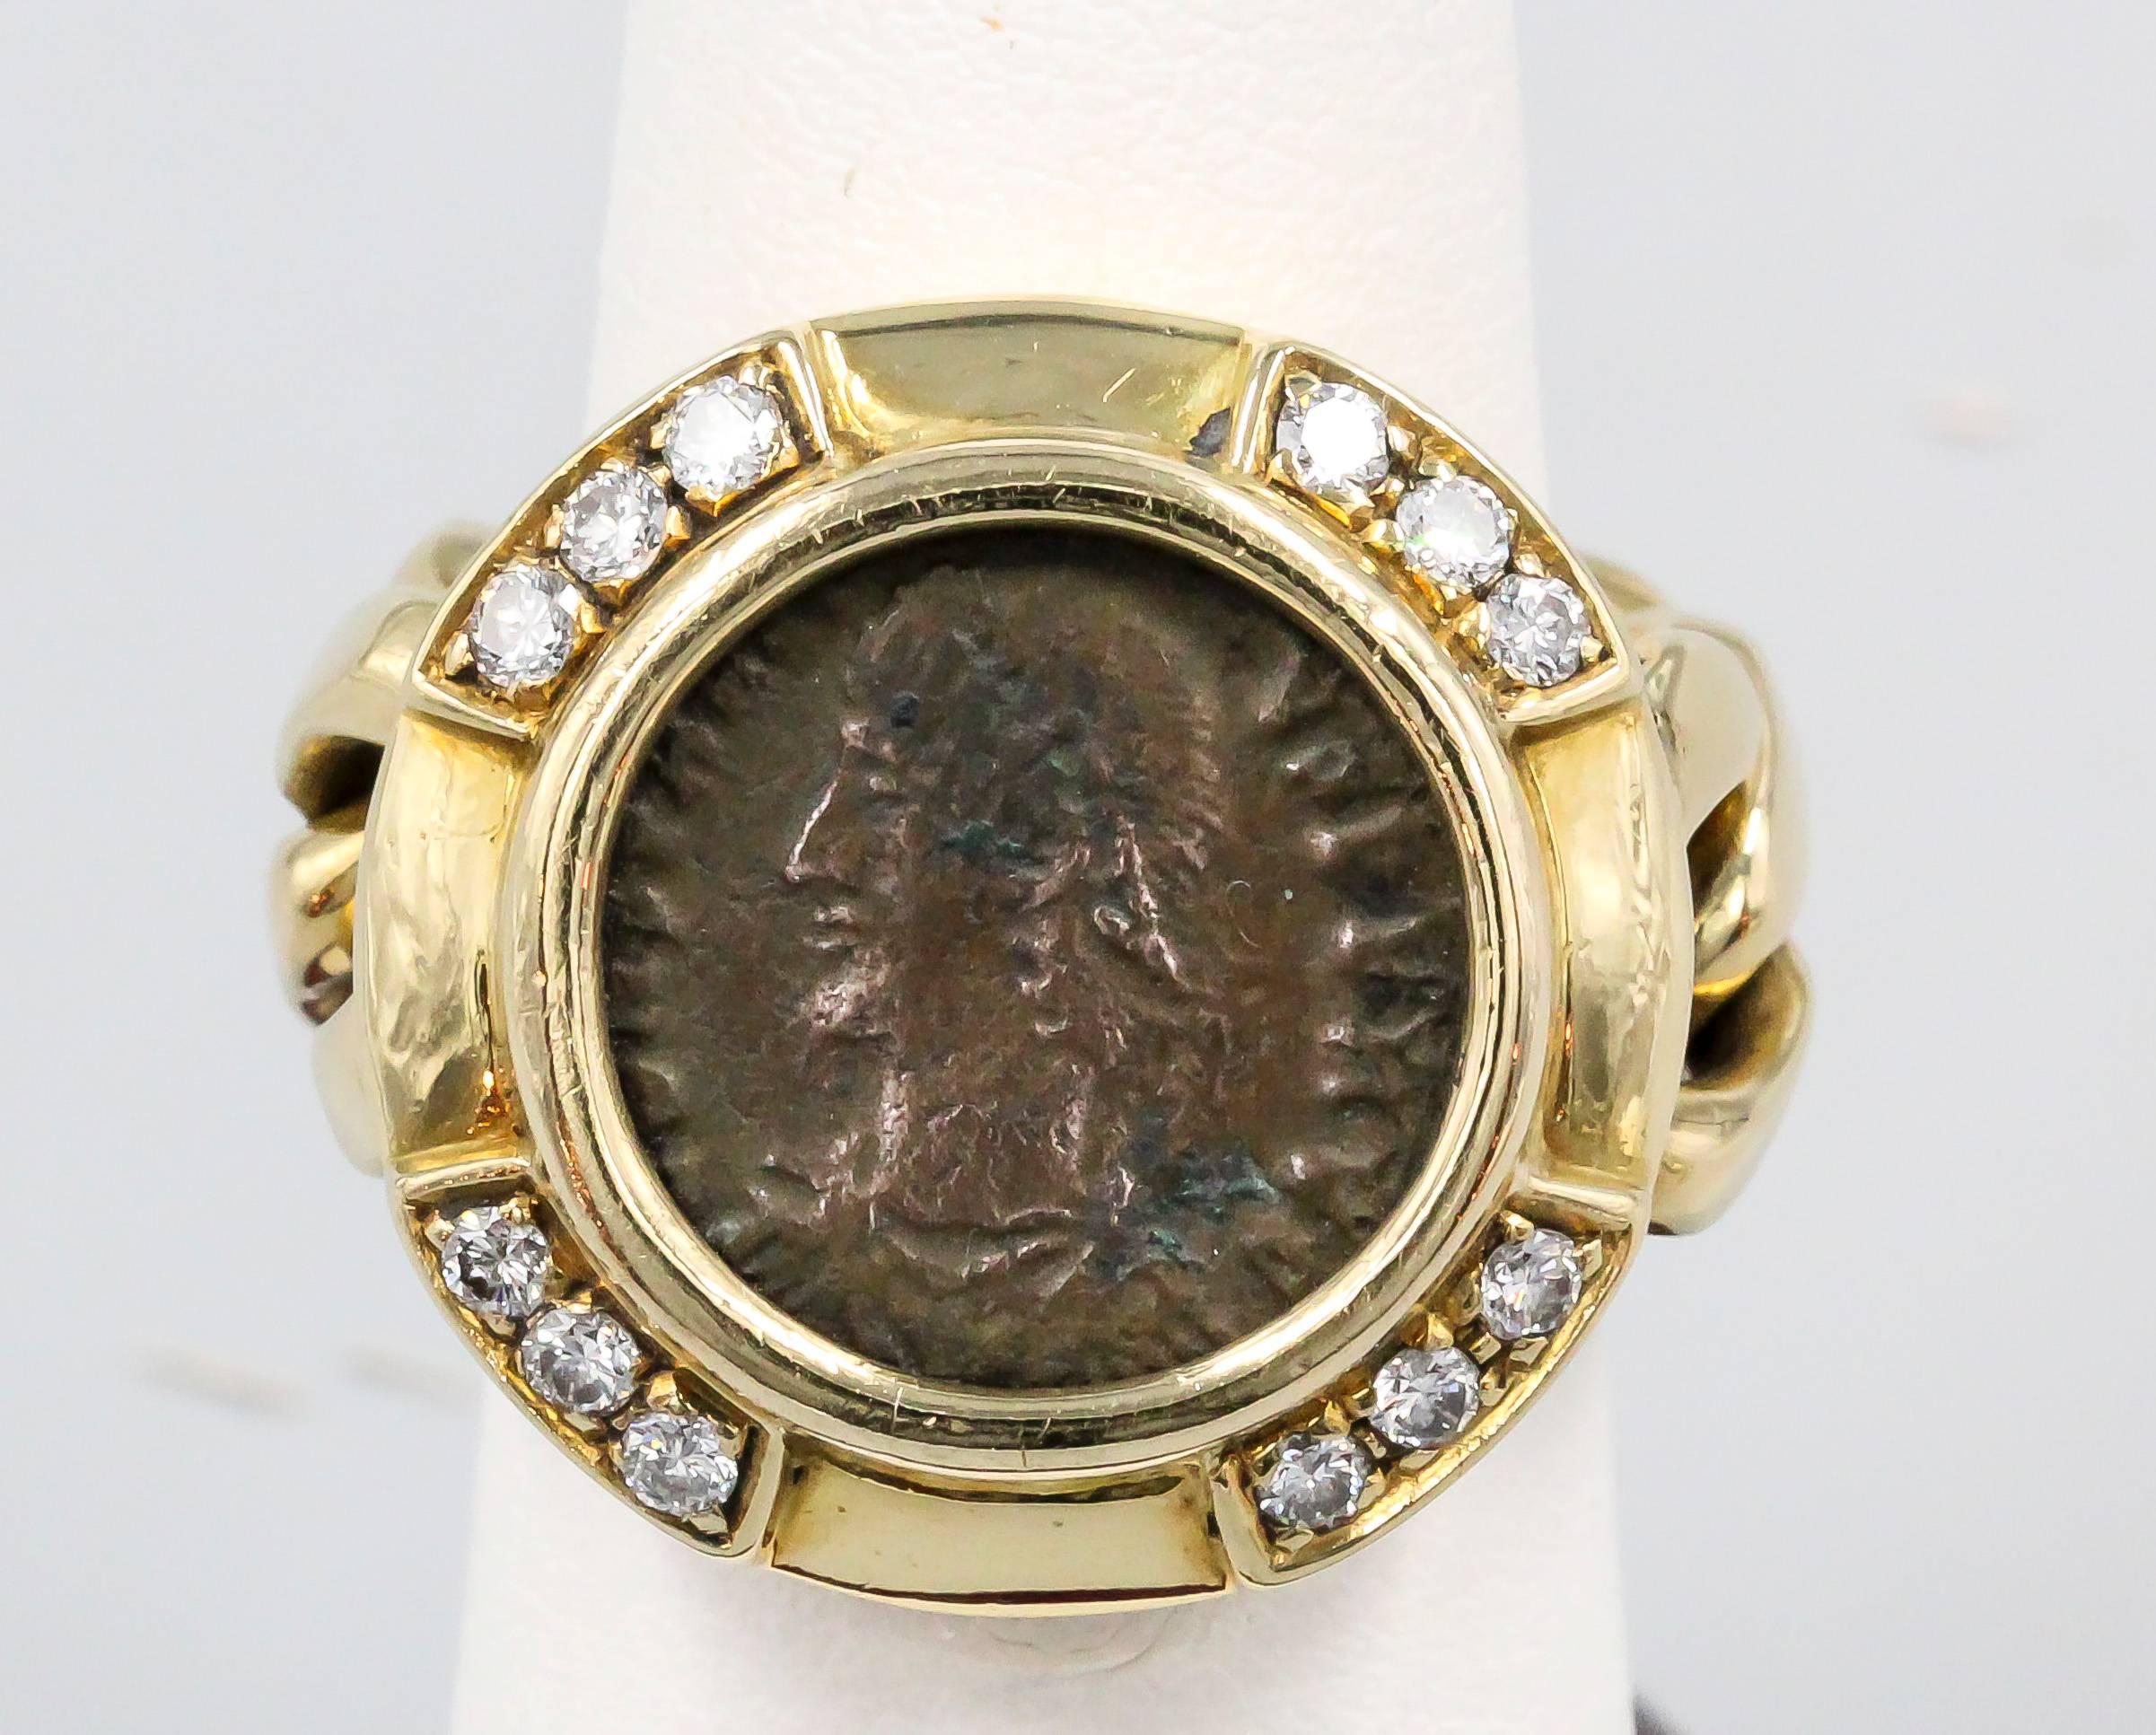 Rare and unusual diamond, ancient Roman coin and 18K yellow gold flexible ring by Bulgari, circa 1970s. It features a Roman coin dated 361 A.D. - rule of Constantius II. Diamonds are high grade round brilliant cut. Beautifully made and easy to wear.